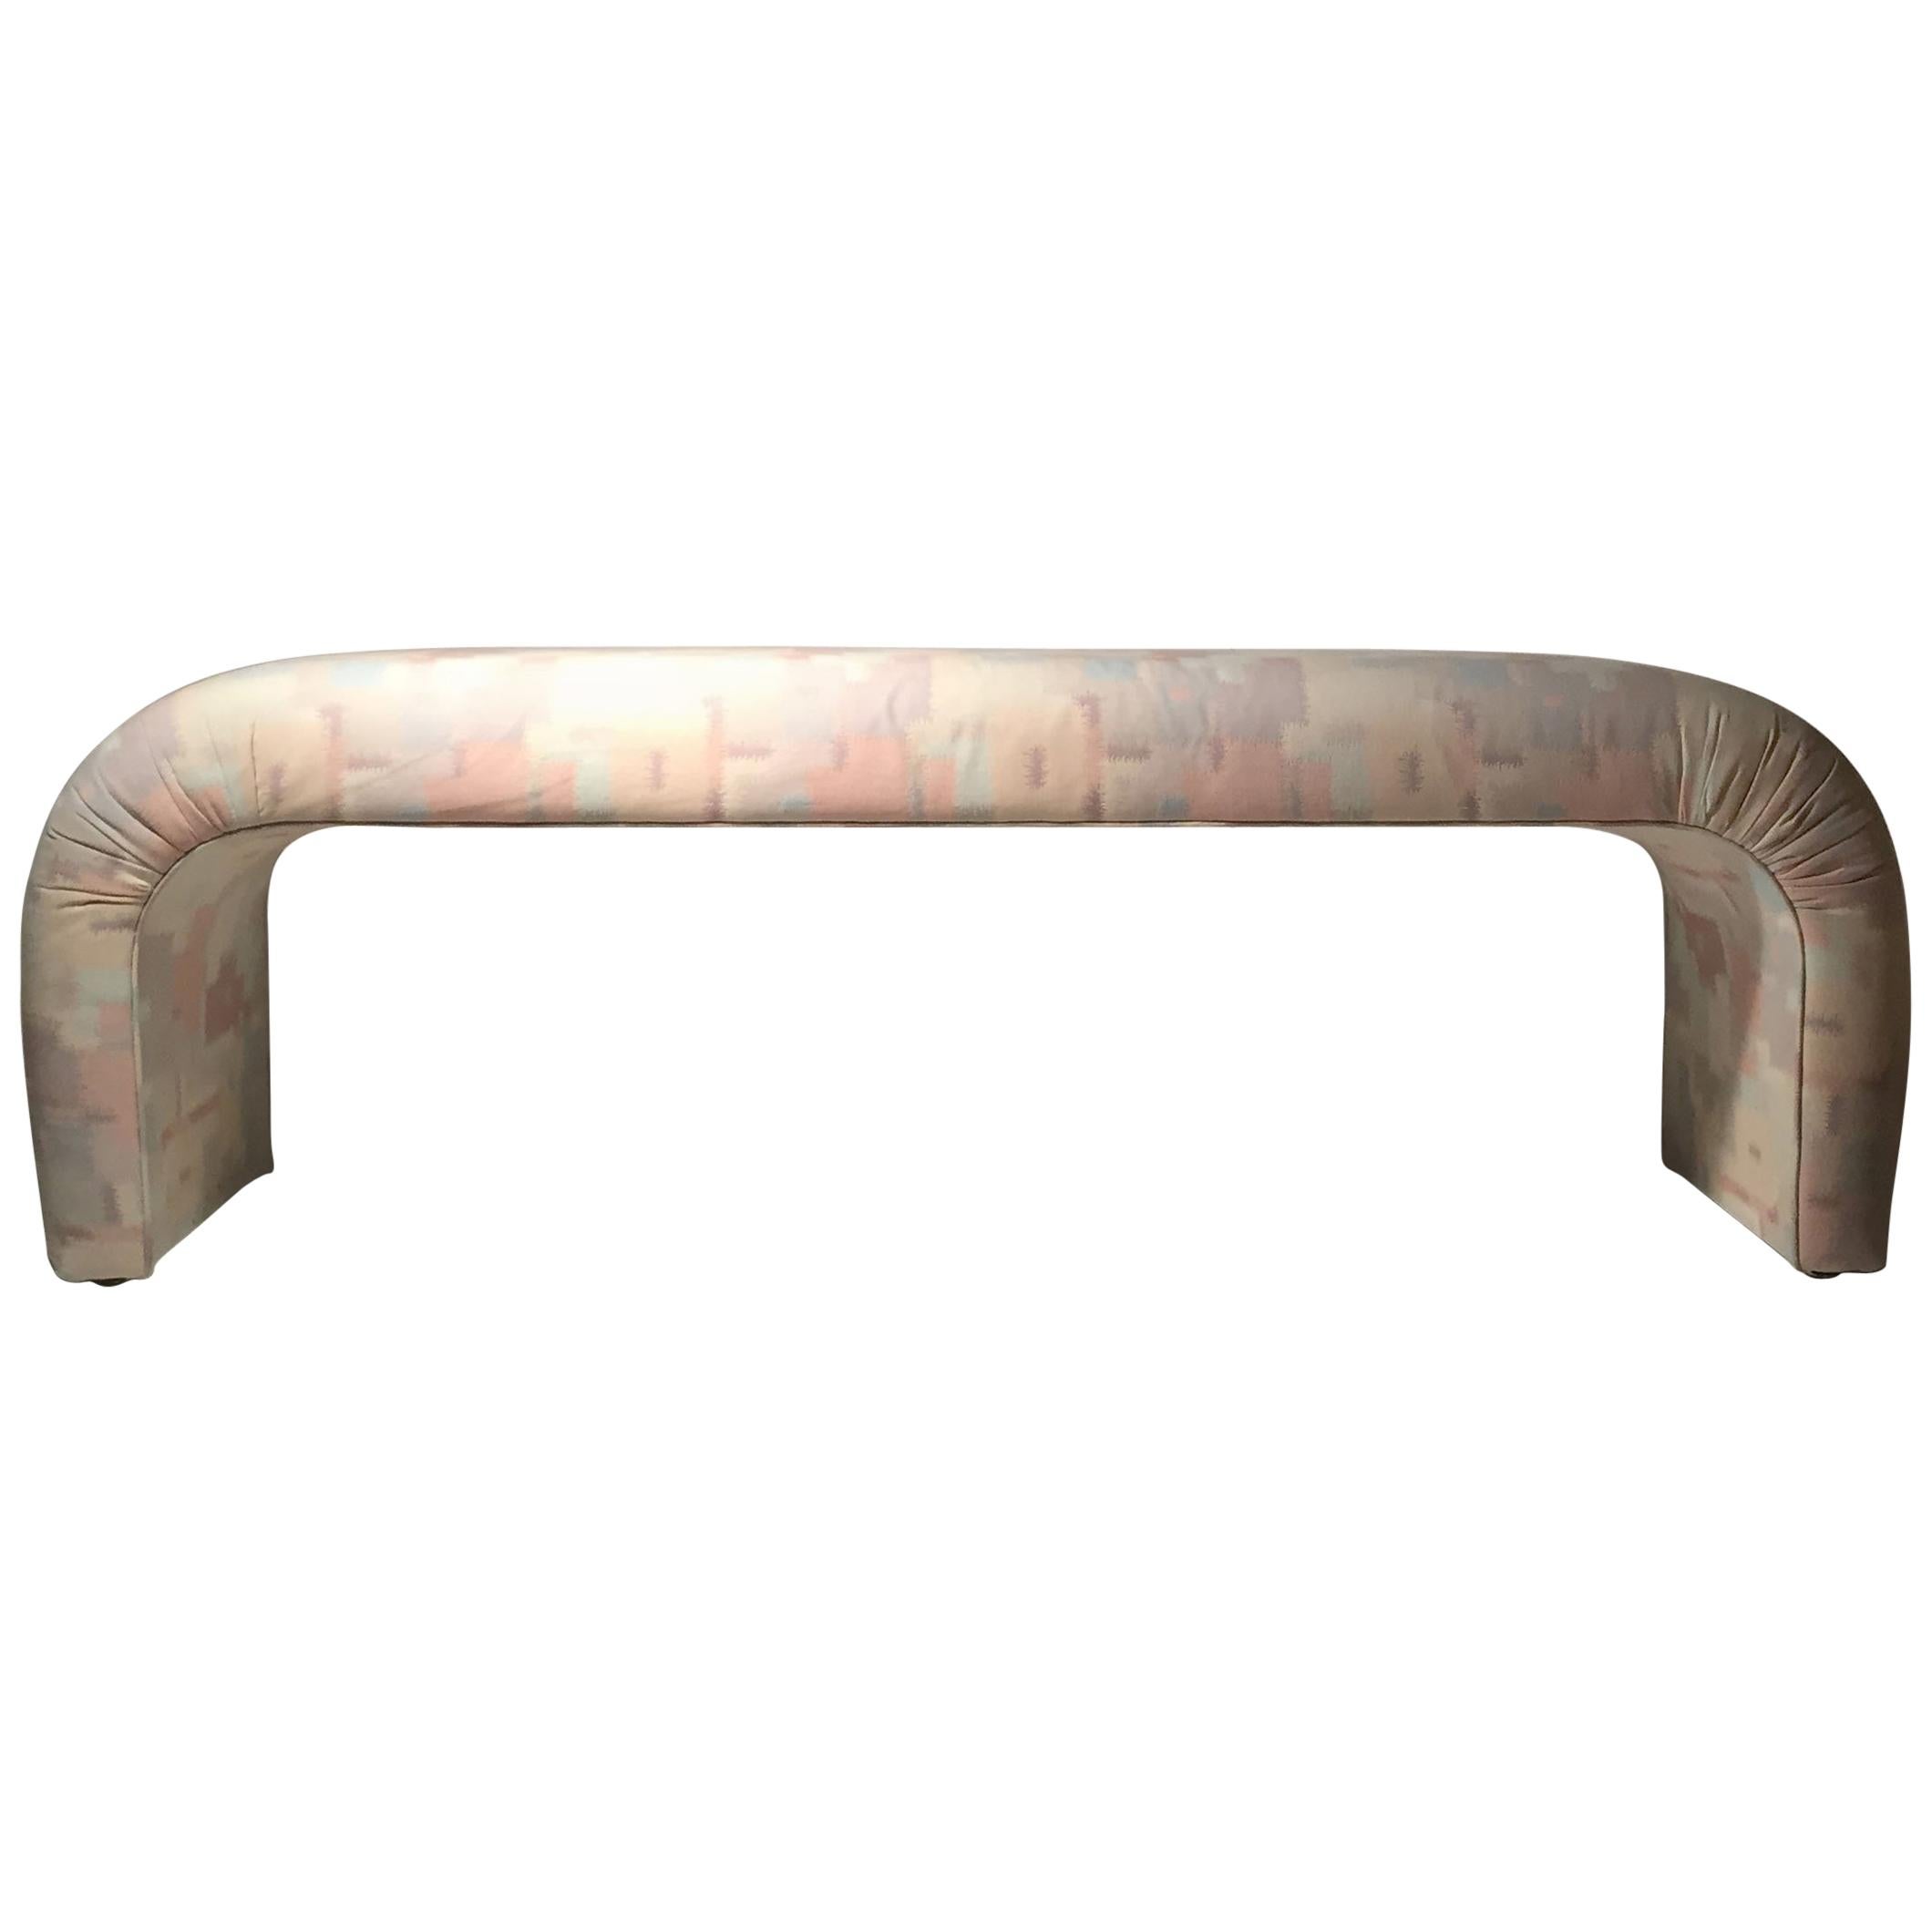 Vintage Upholstered Waterfall Bench attributed to Milo Baughman